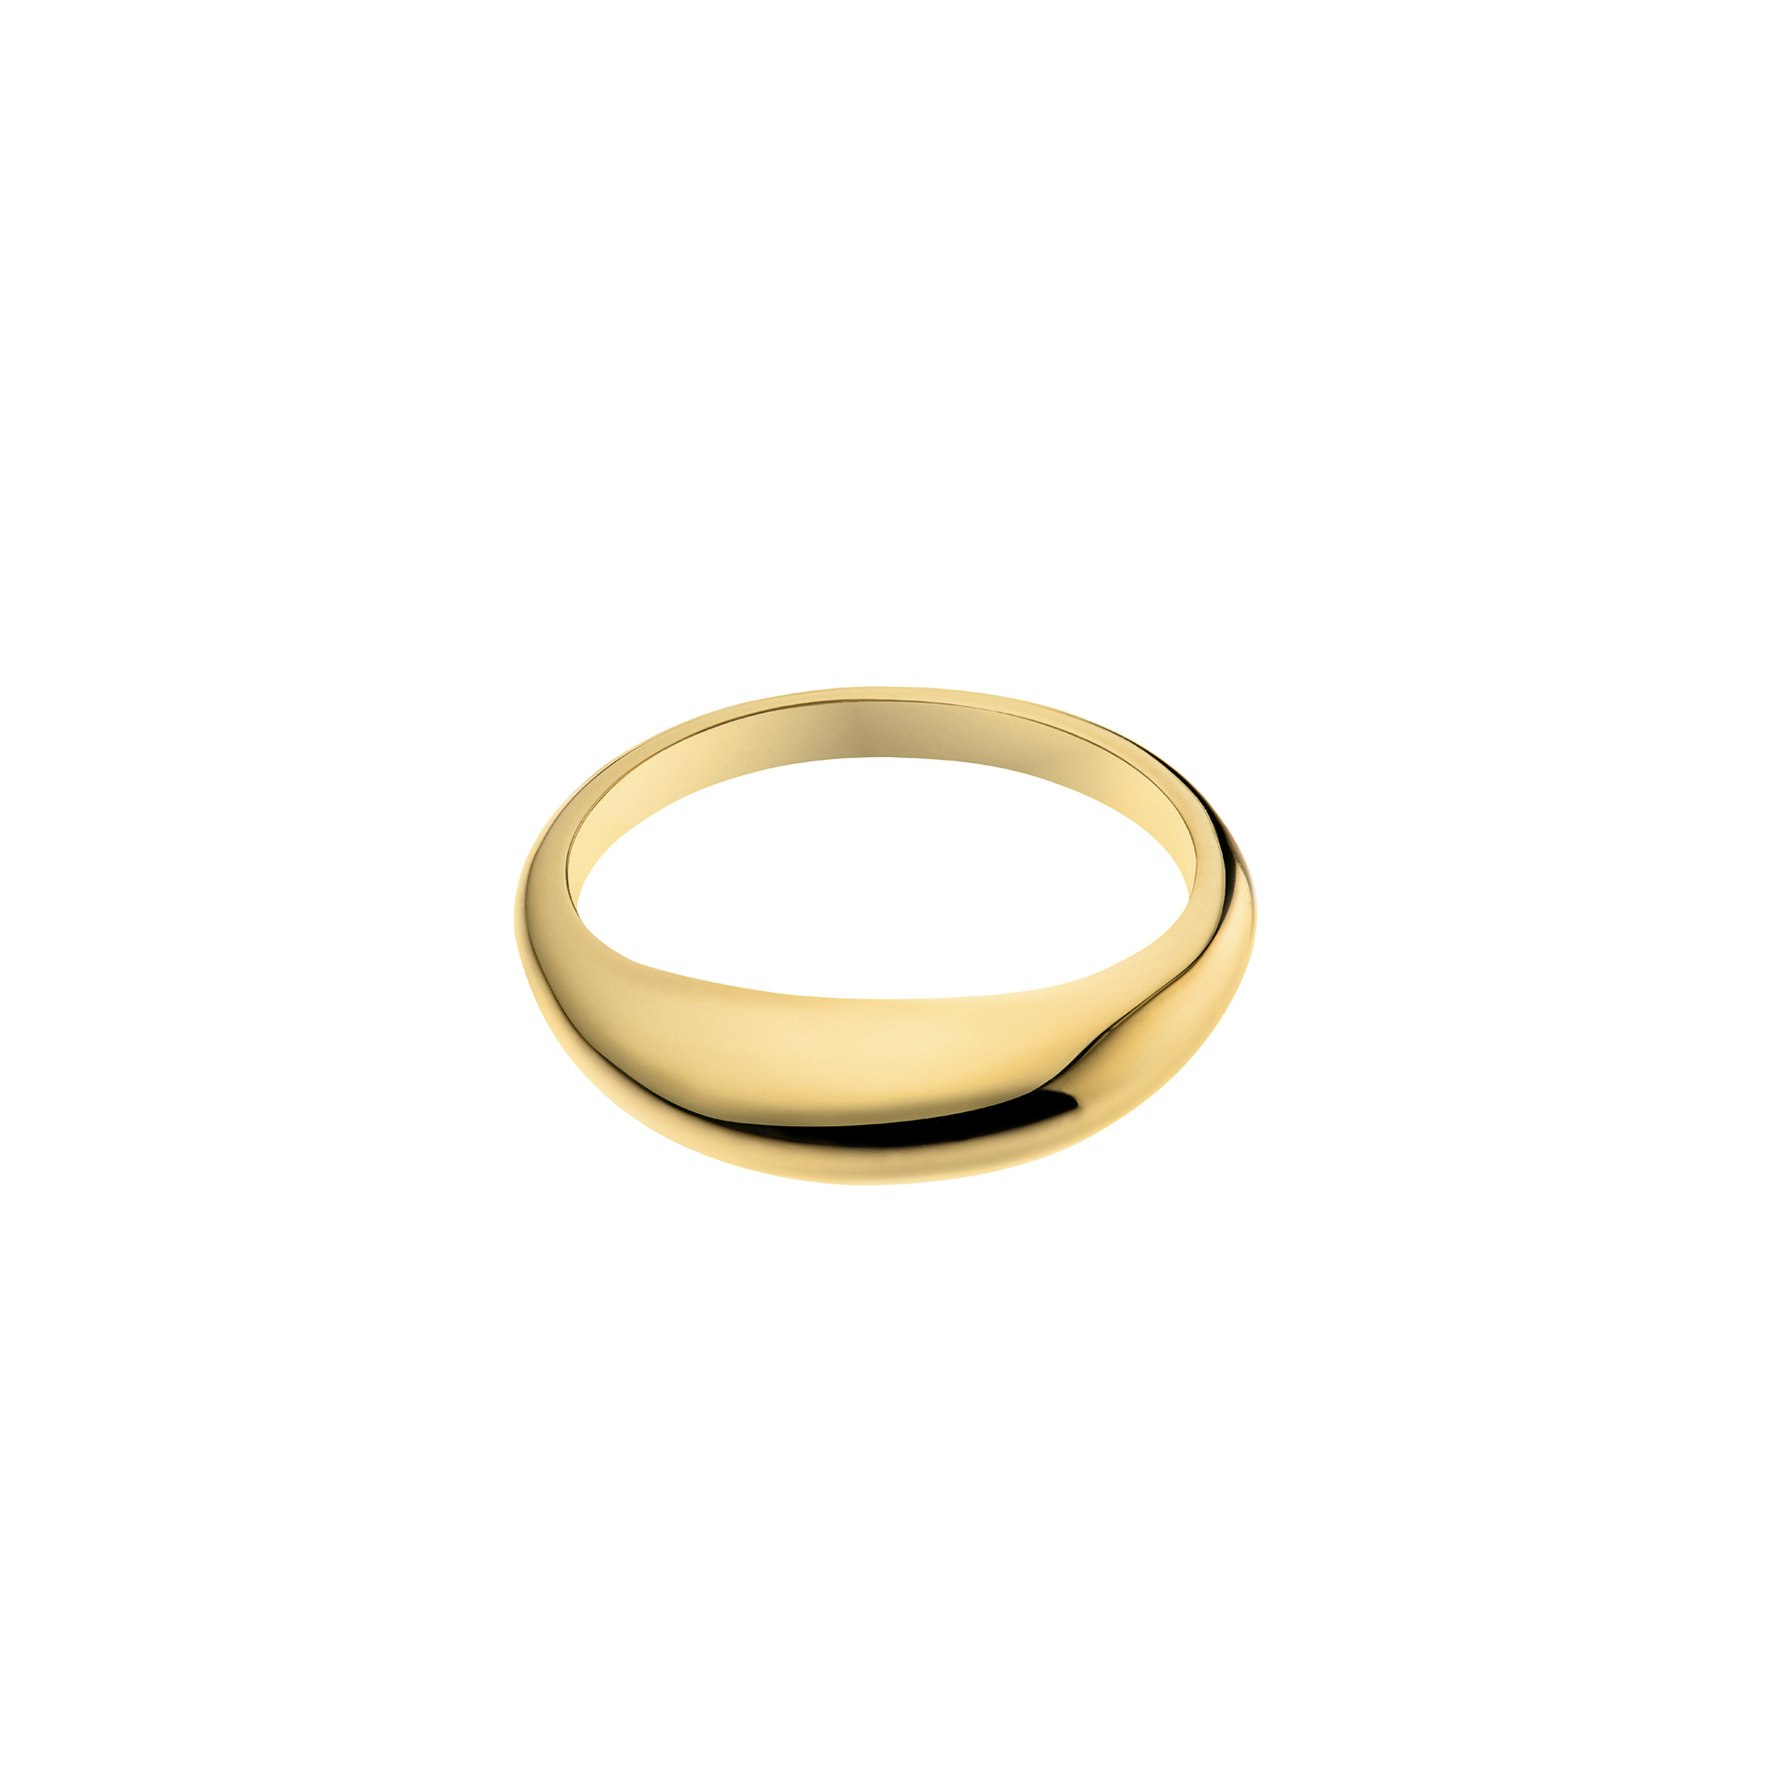 Globe Ring from Pernille Corydon in Goldplated-Silver Sterling 925